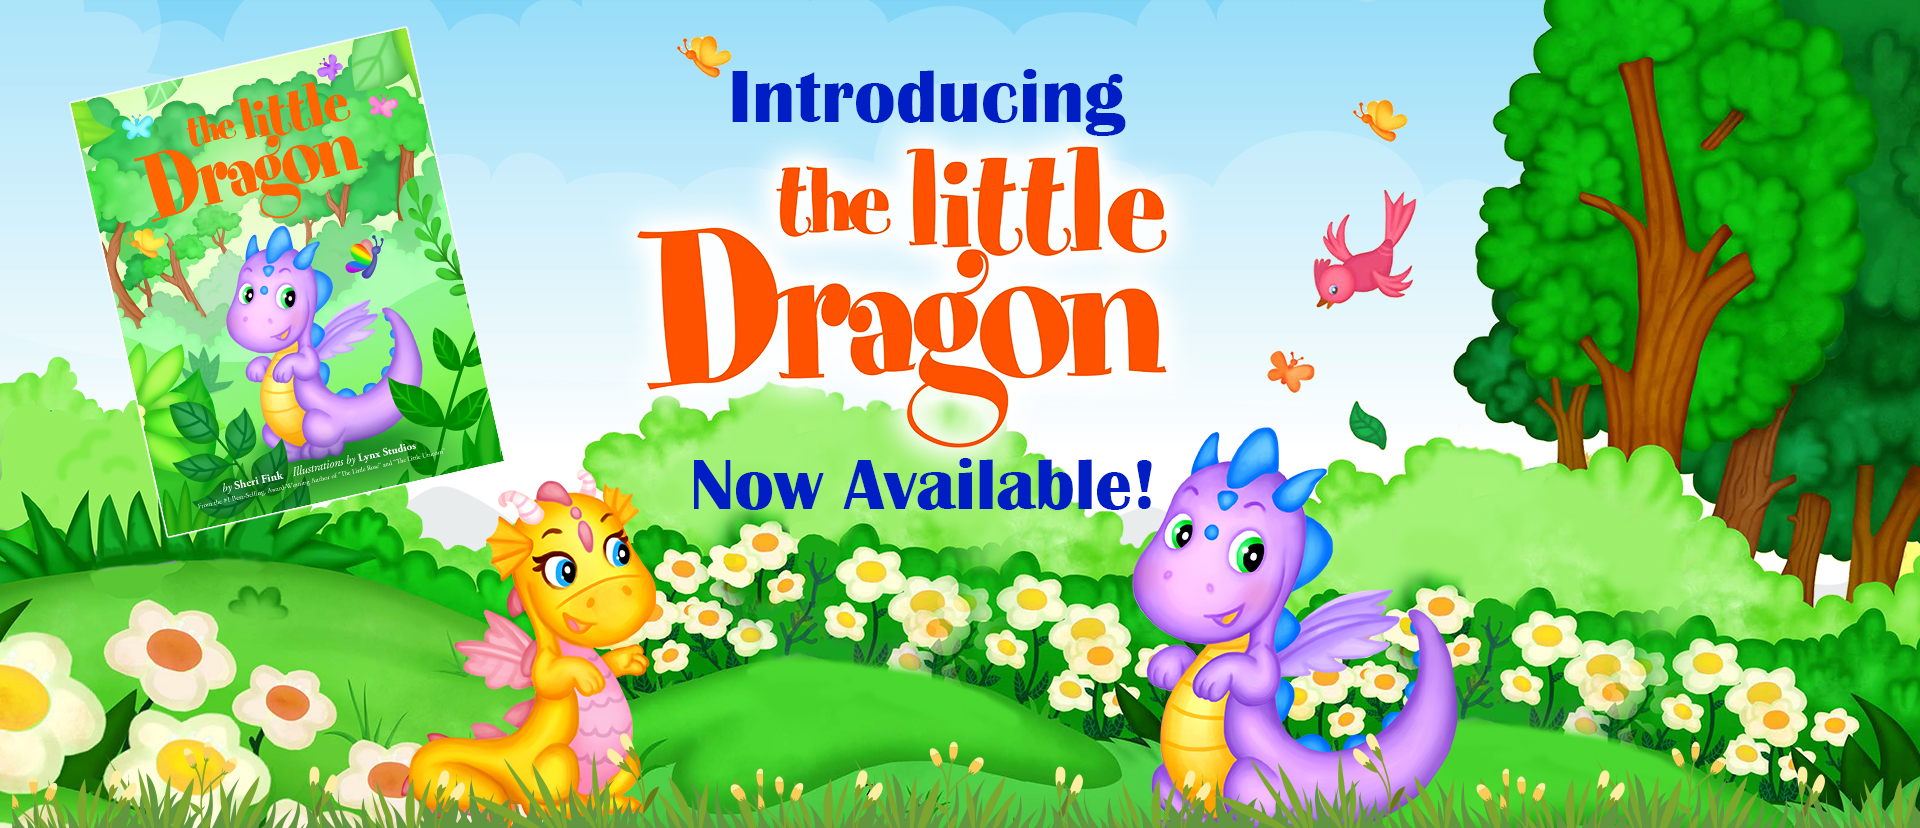 The Little Dragon by Sheri Fink is now available